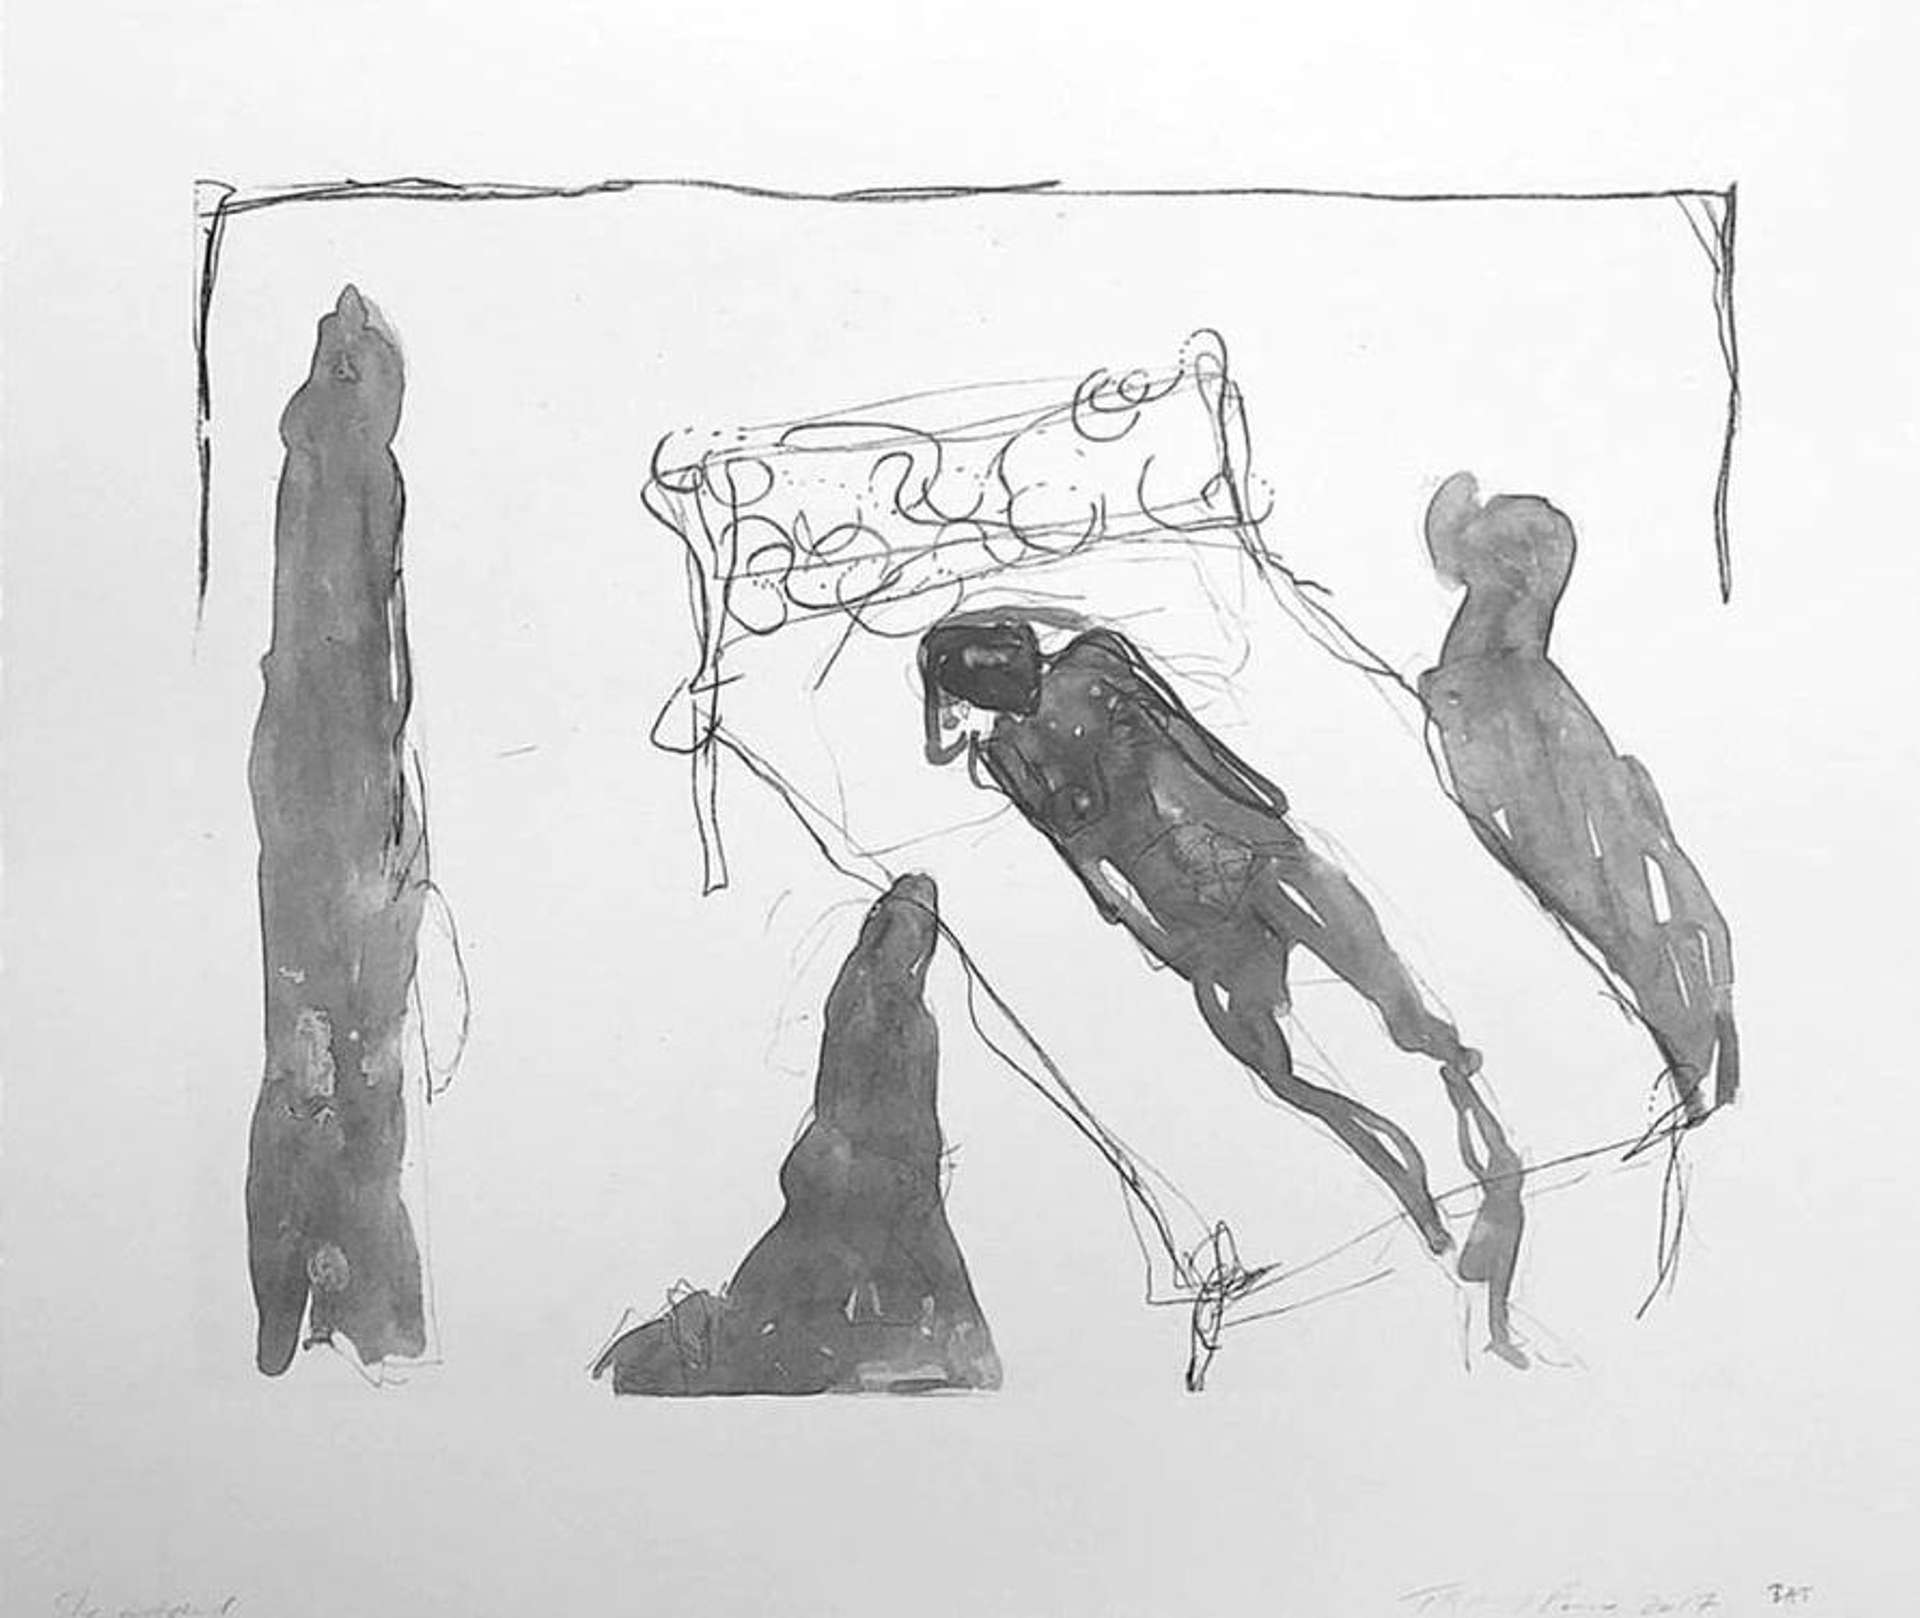 Tracey Emin’s She Watched. A print of one shadow of a woman’s body lying in bed surrounded by three other shadows. 